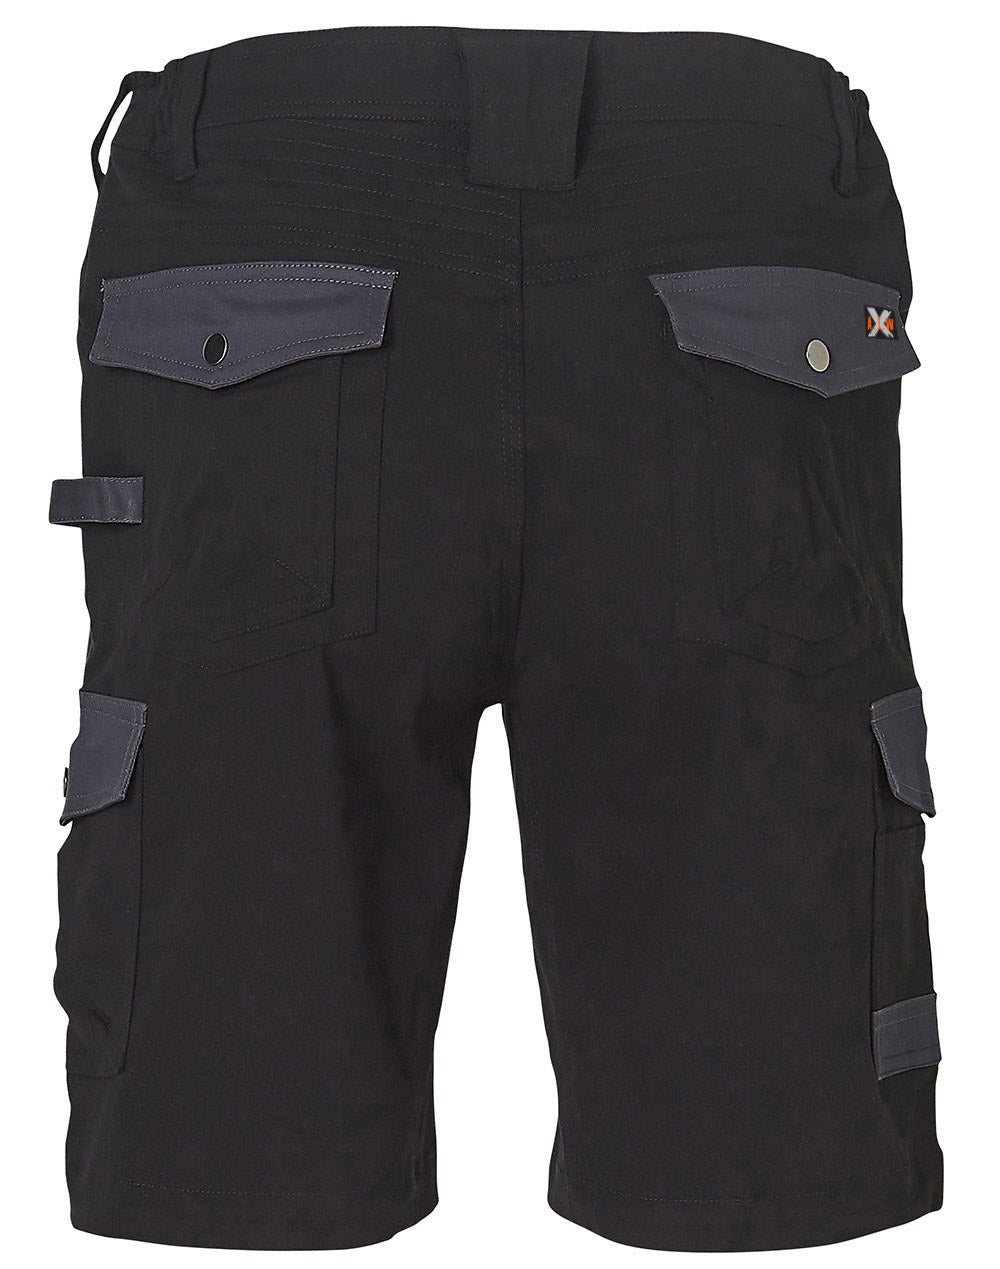 AIW - WP23 - MENS STRETCH CARGO WORK SHORTS WITH DESIGN PANEL TREATMENTS